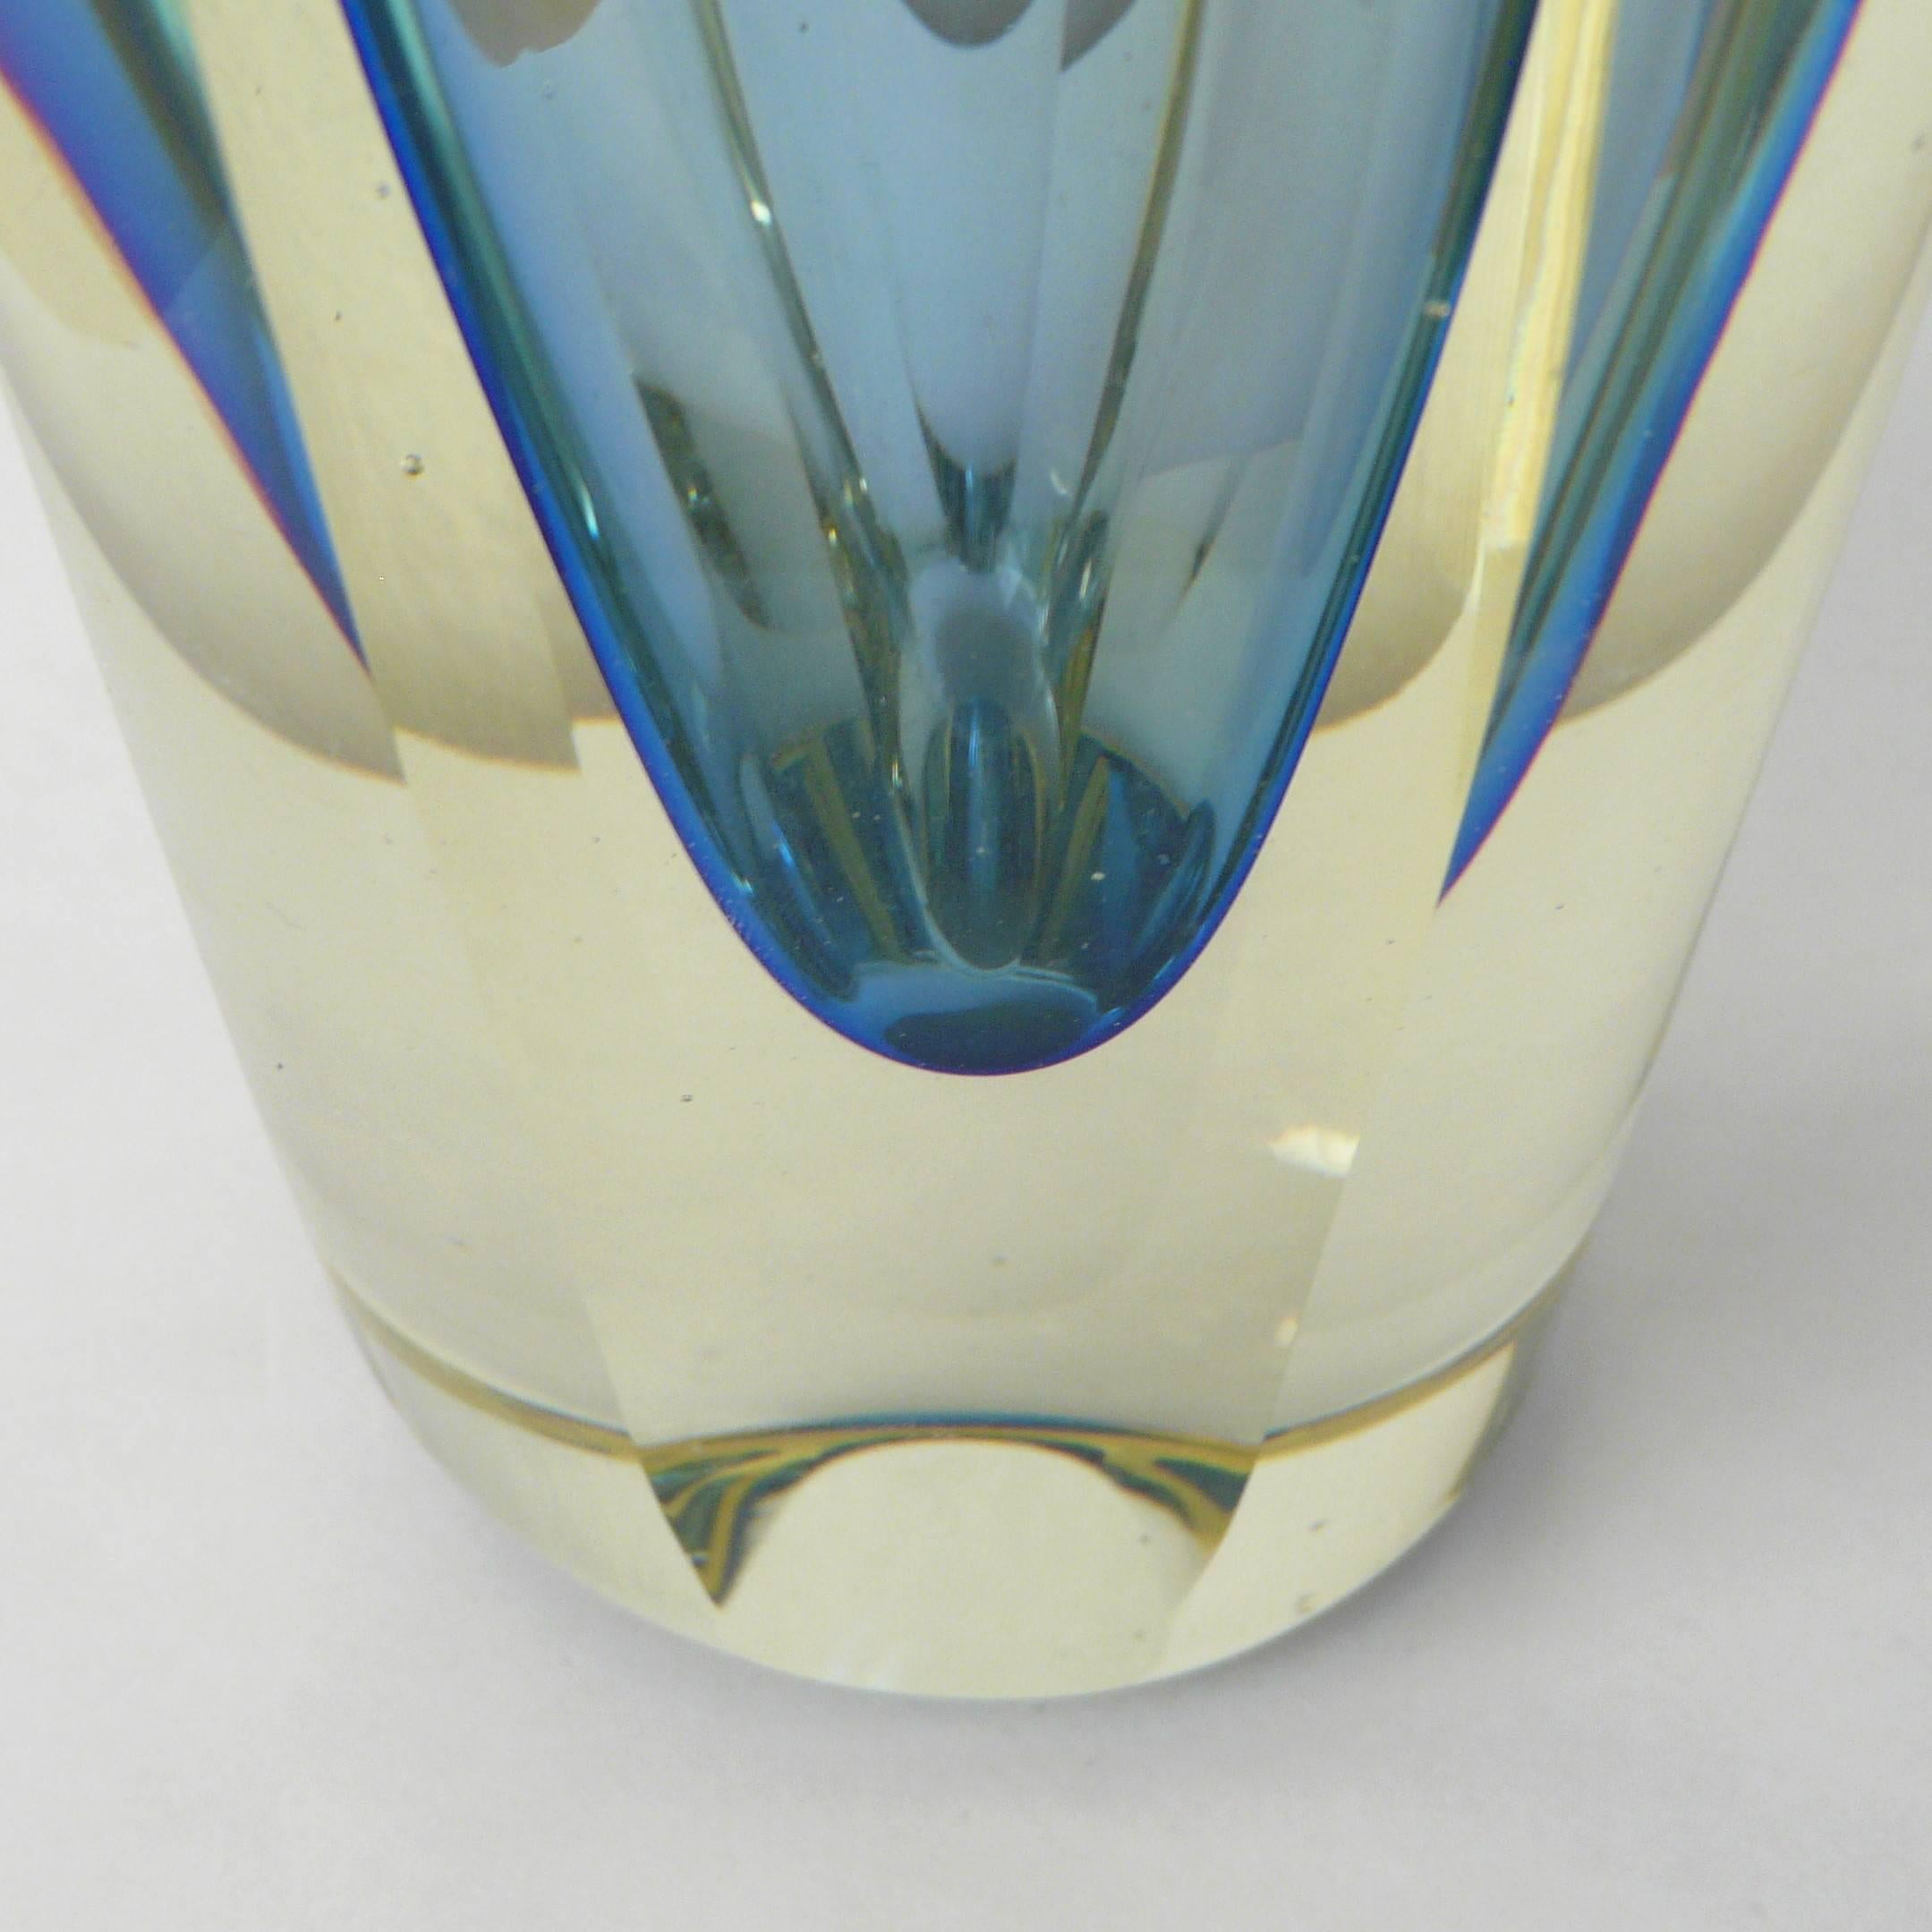 Tall Murano glass blue vase by Mandruzzato. Sommerso and etched techniques. Thick glass in perfect condition. Can be used as a vase or sculpture.